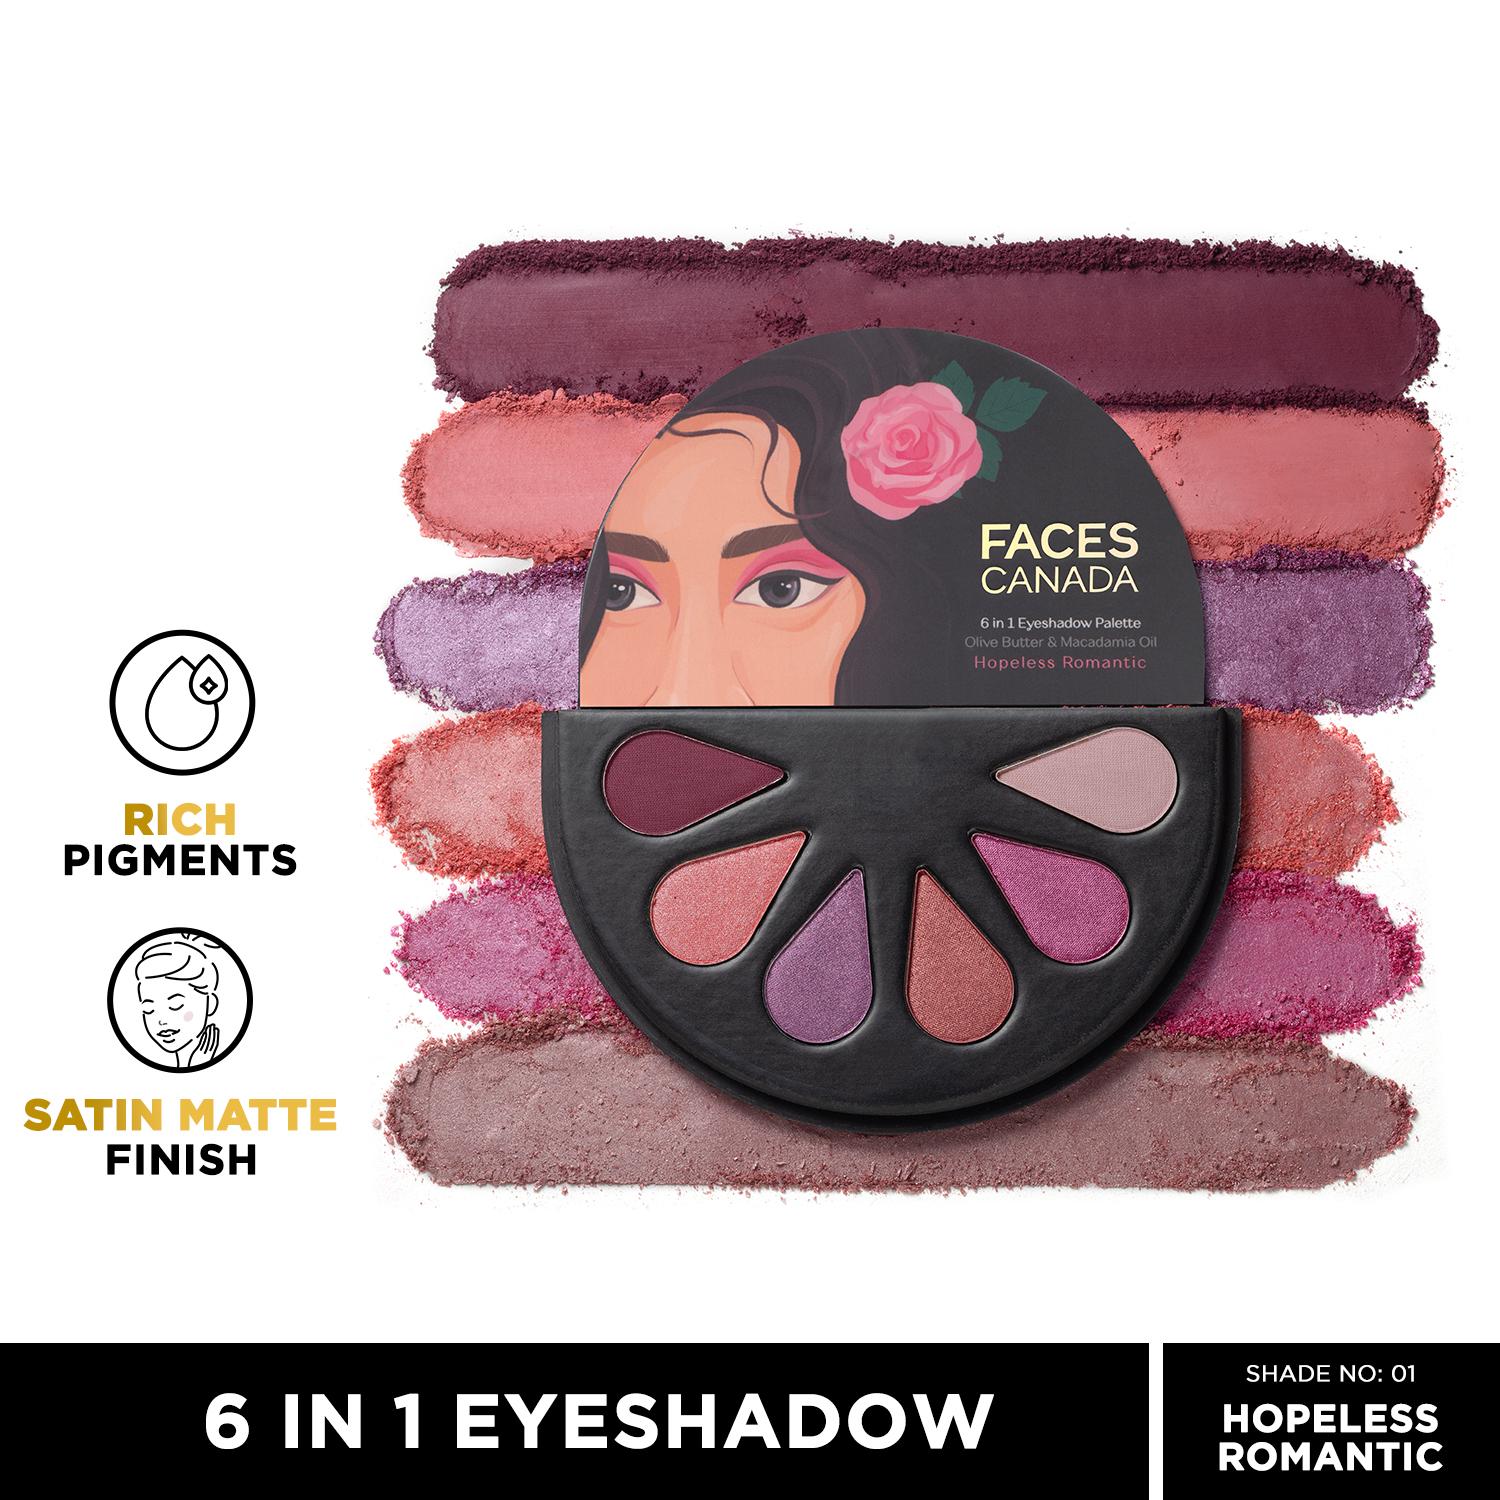 Faces Canada | Faces Canada 6 in 1 Eyeshadow Palette - Hopeless Romantic 01, Olive Butter & Macadamia Oil (6 g)